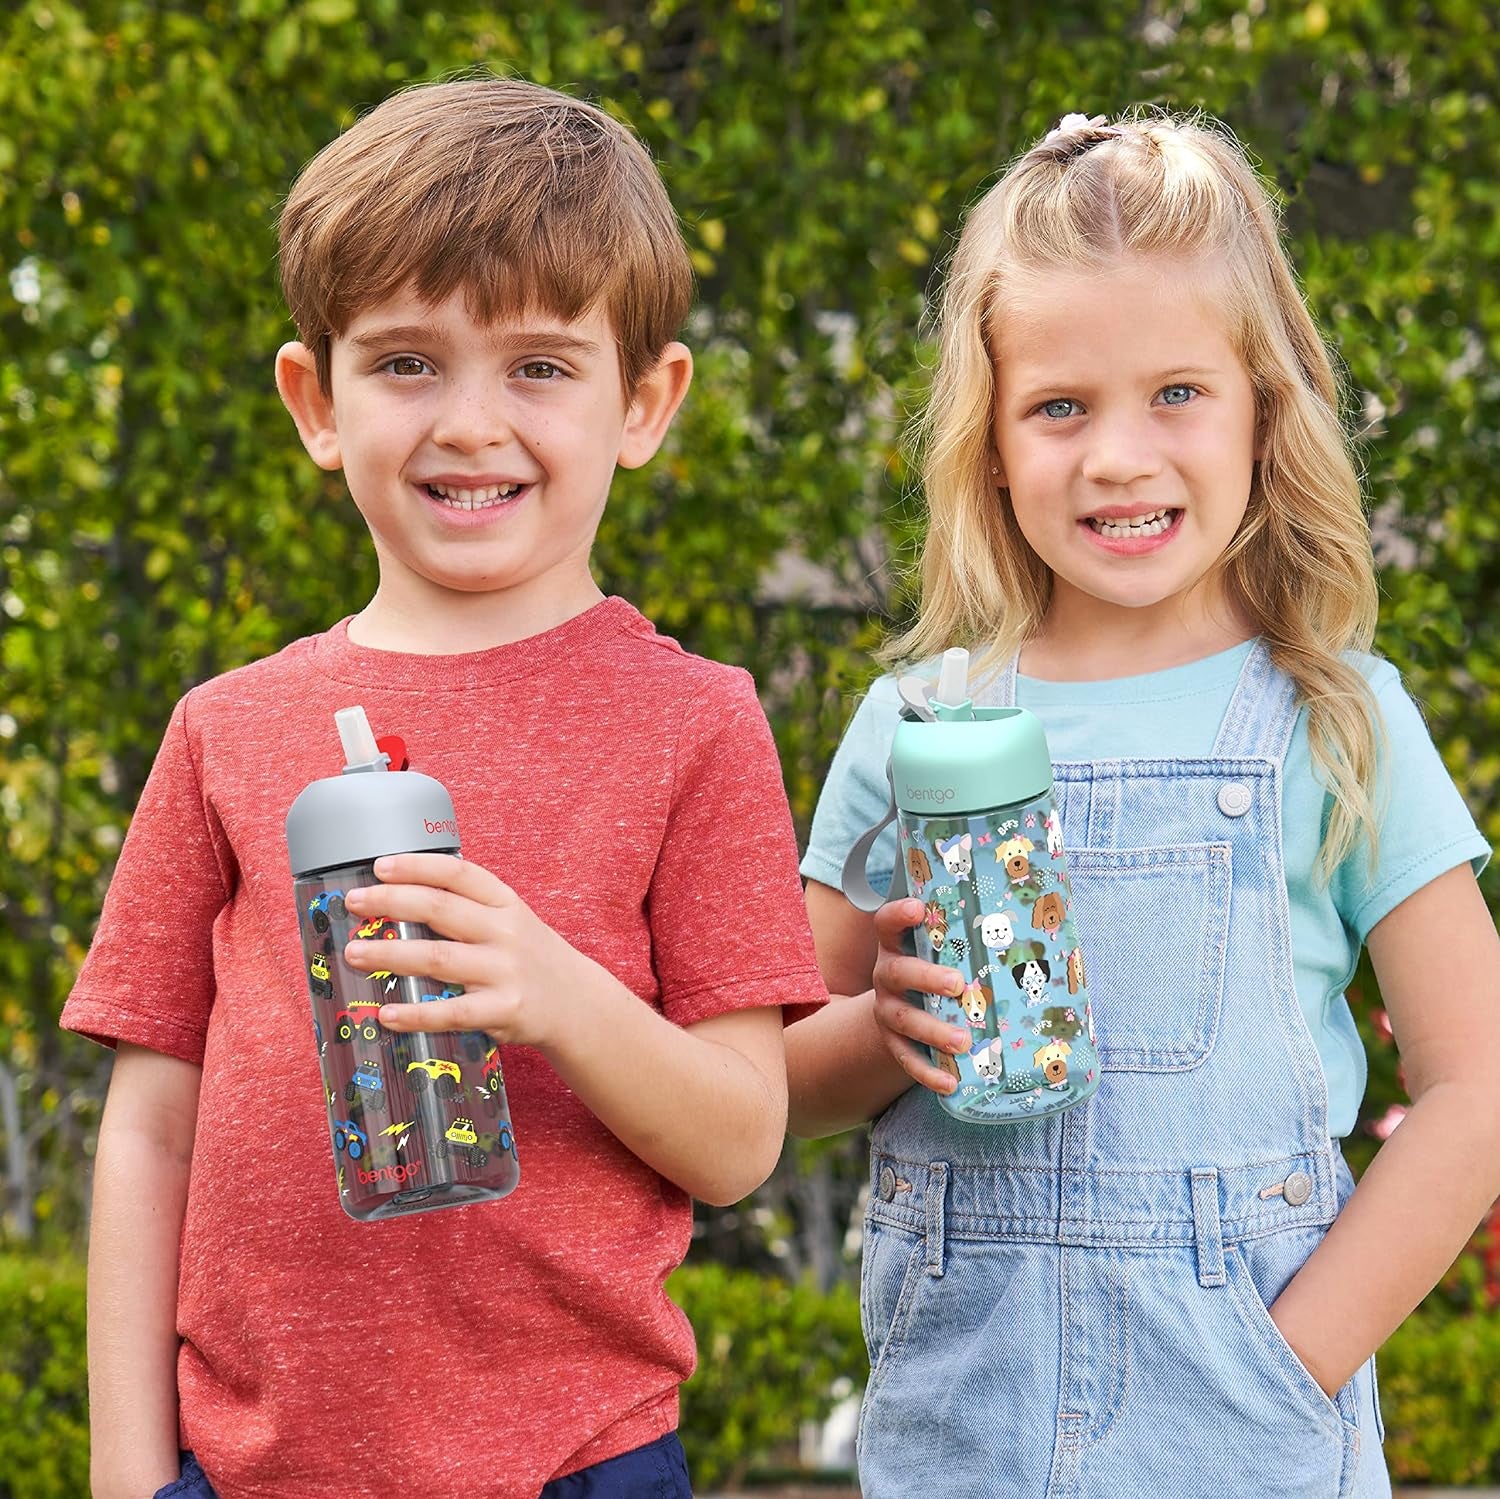 ® Kids Water Bottle - New & Improved 2023 Leak-Proof, Bpa-Free 15 Oz. Cup for Toddlers & Children - Flip-Up Safe-Sip Straw for School, Sports, Daycare, Camp & More (Trucks)